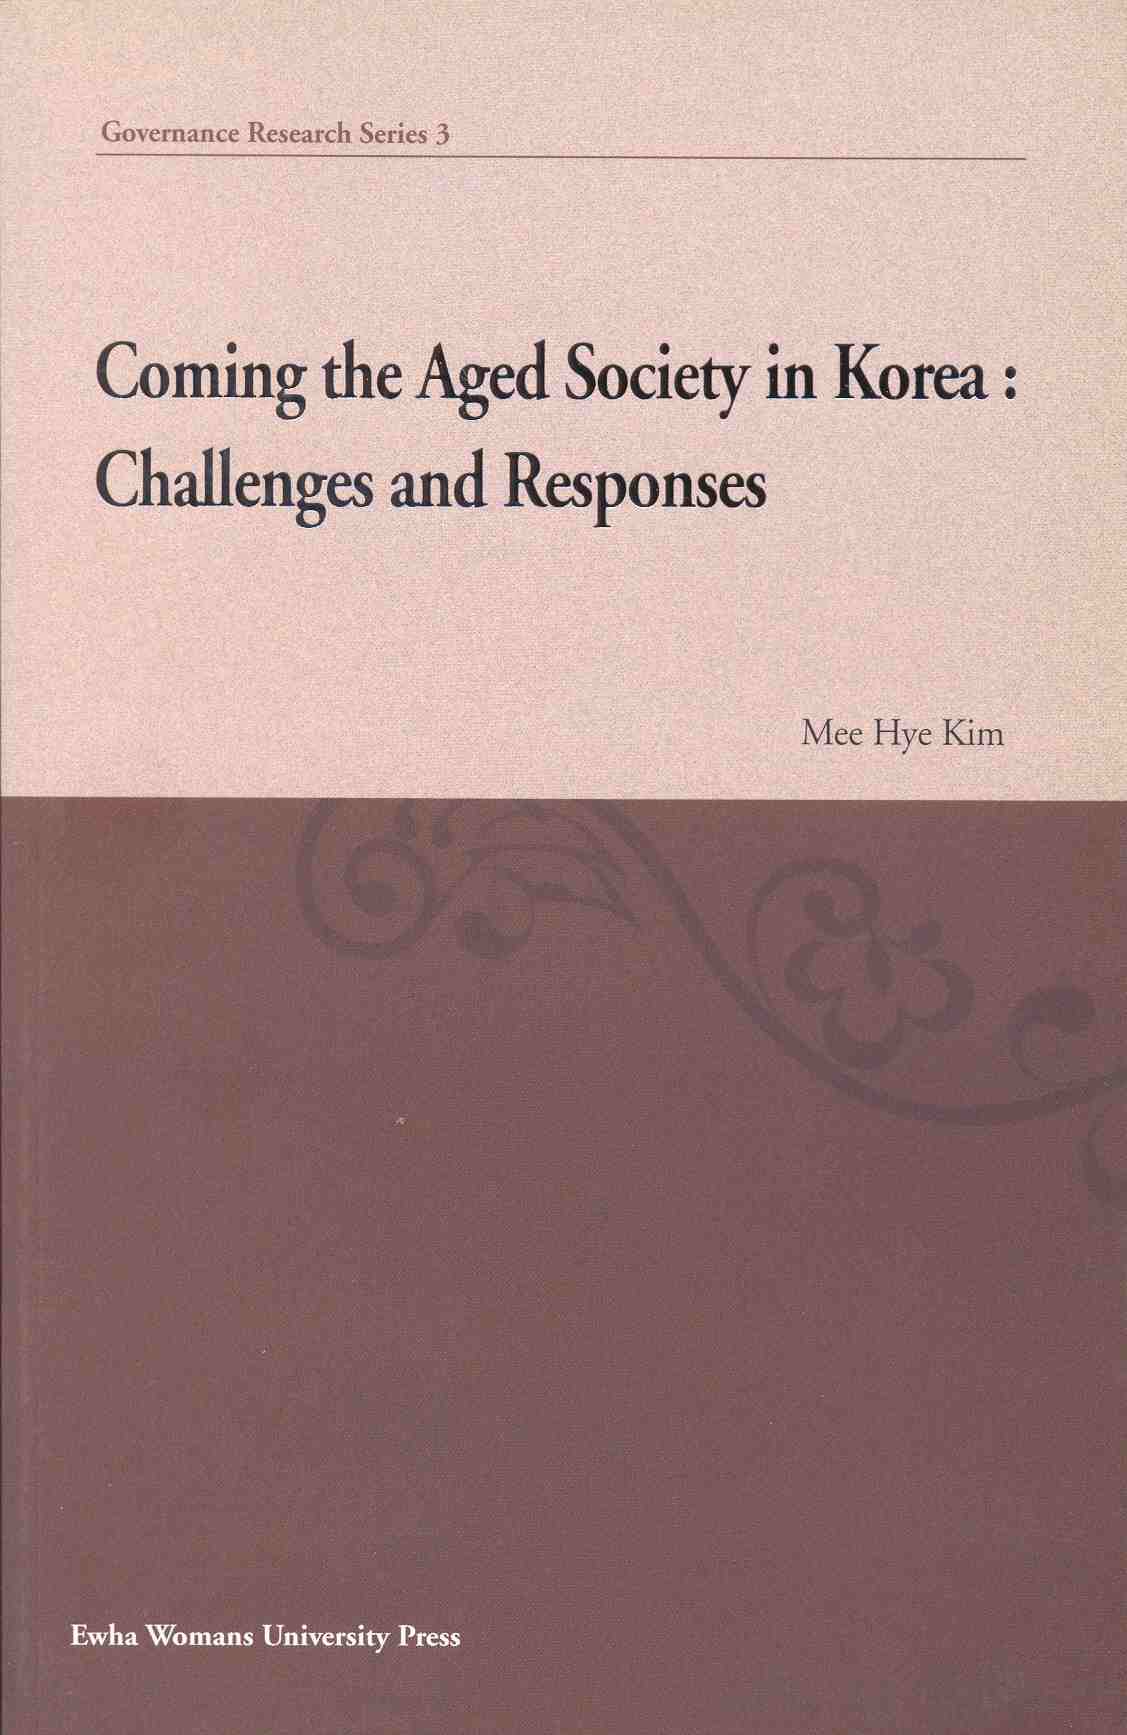 Coming the Aged Society in Korea : Challenges and Responses  도서이미지